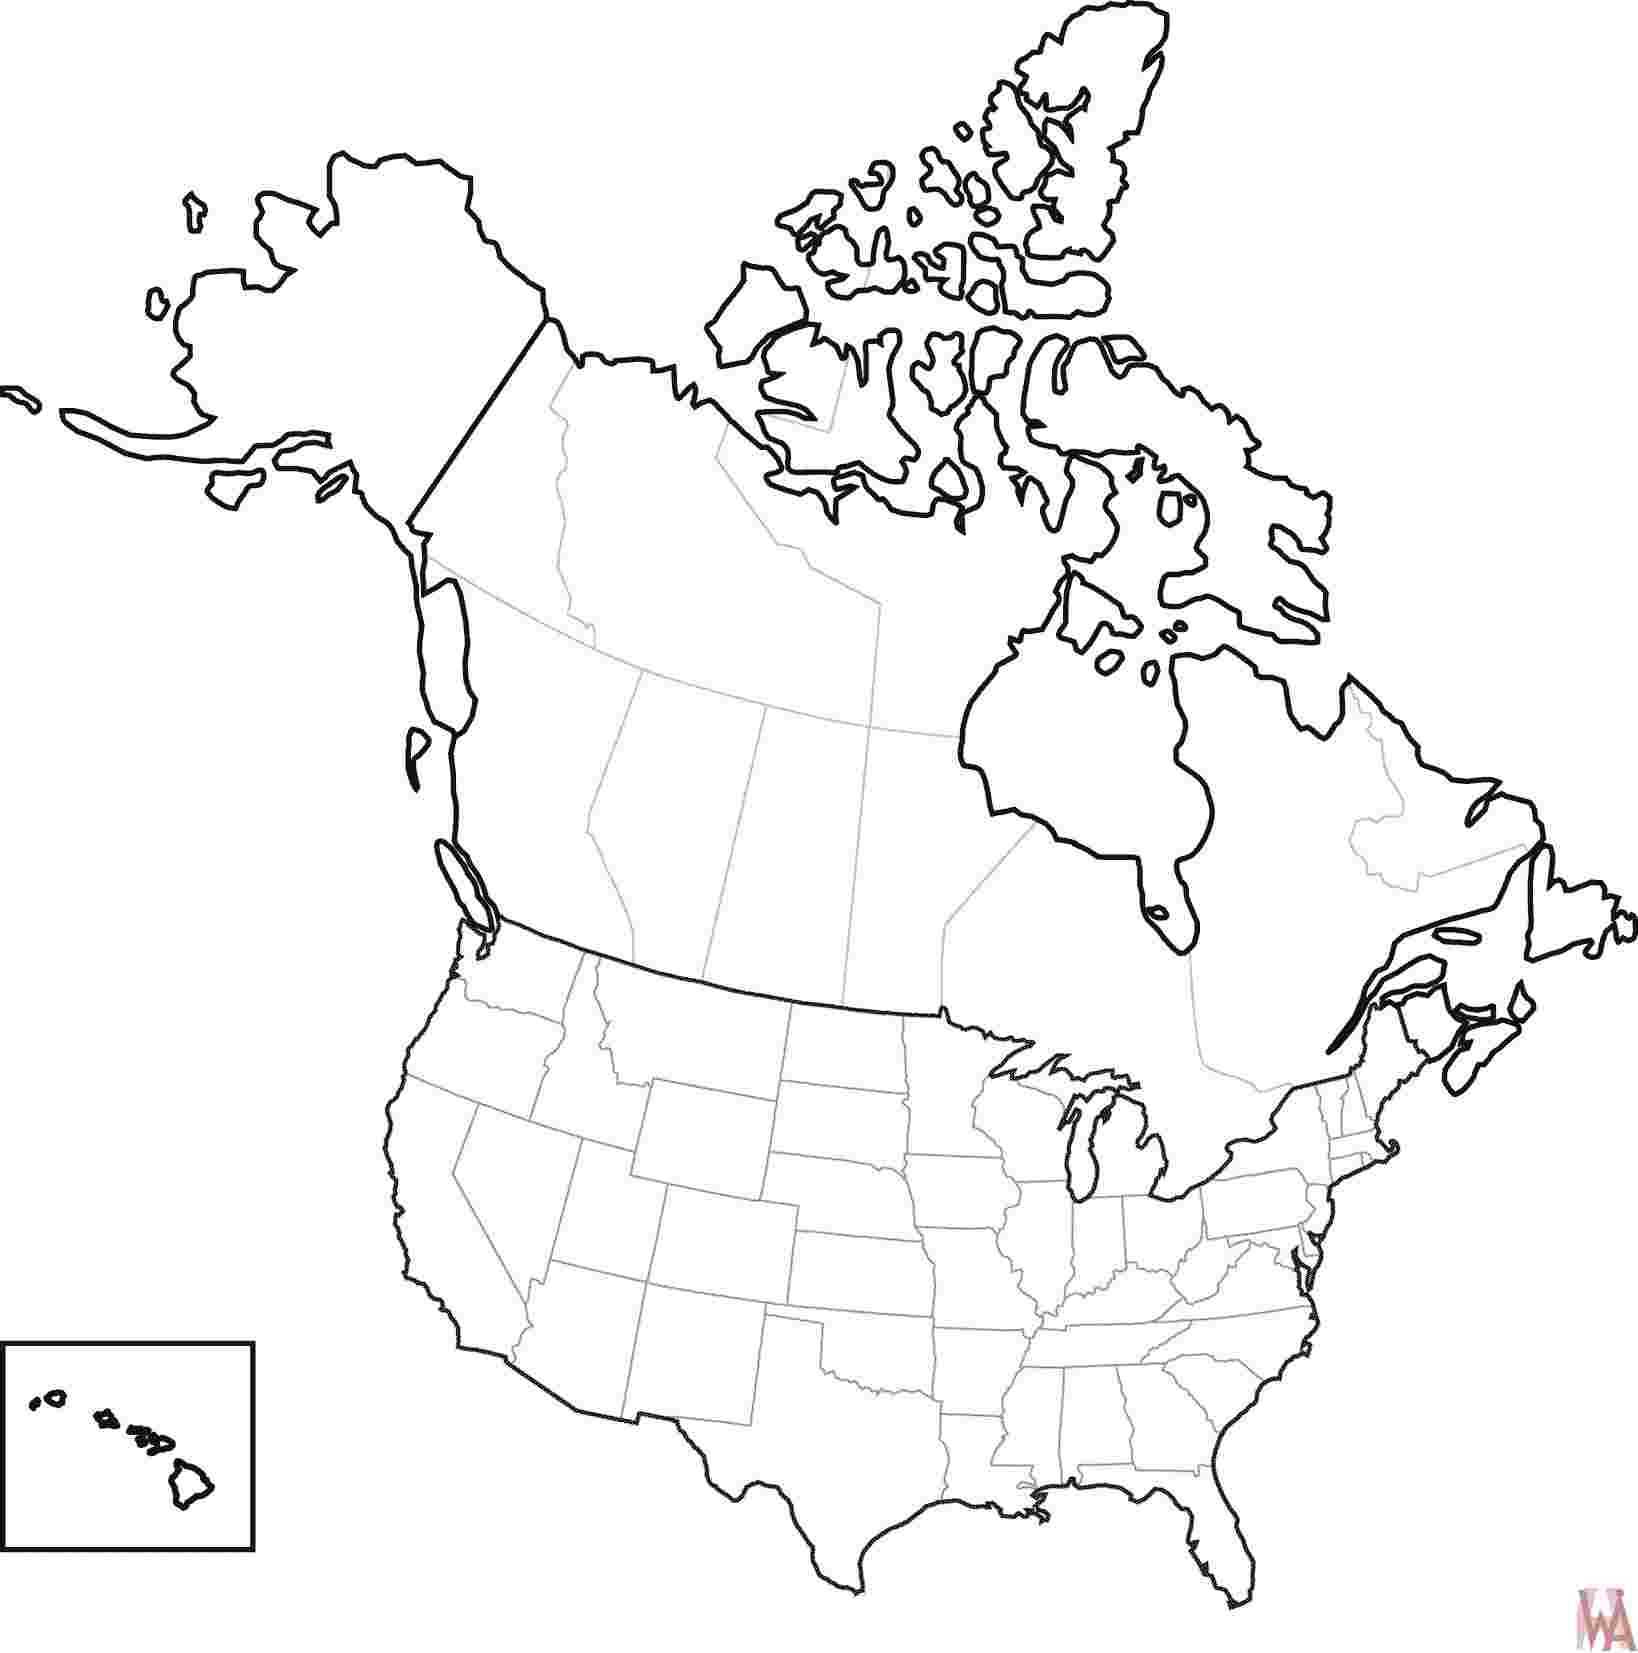 Blank Printable Map Of The United States And Canada Blank For Blank Template Of The United States